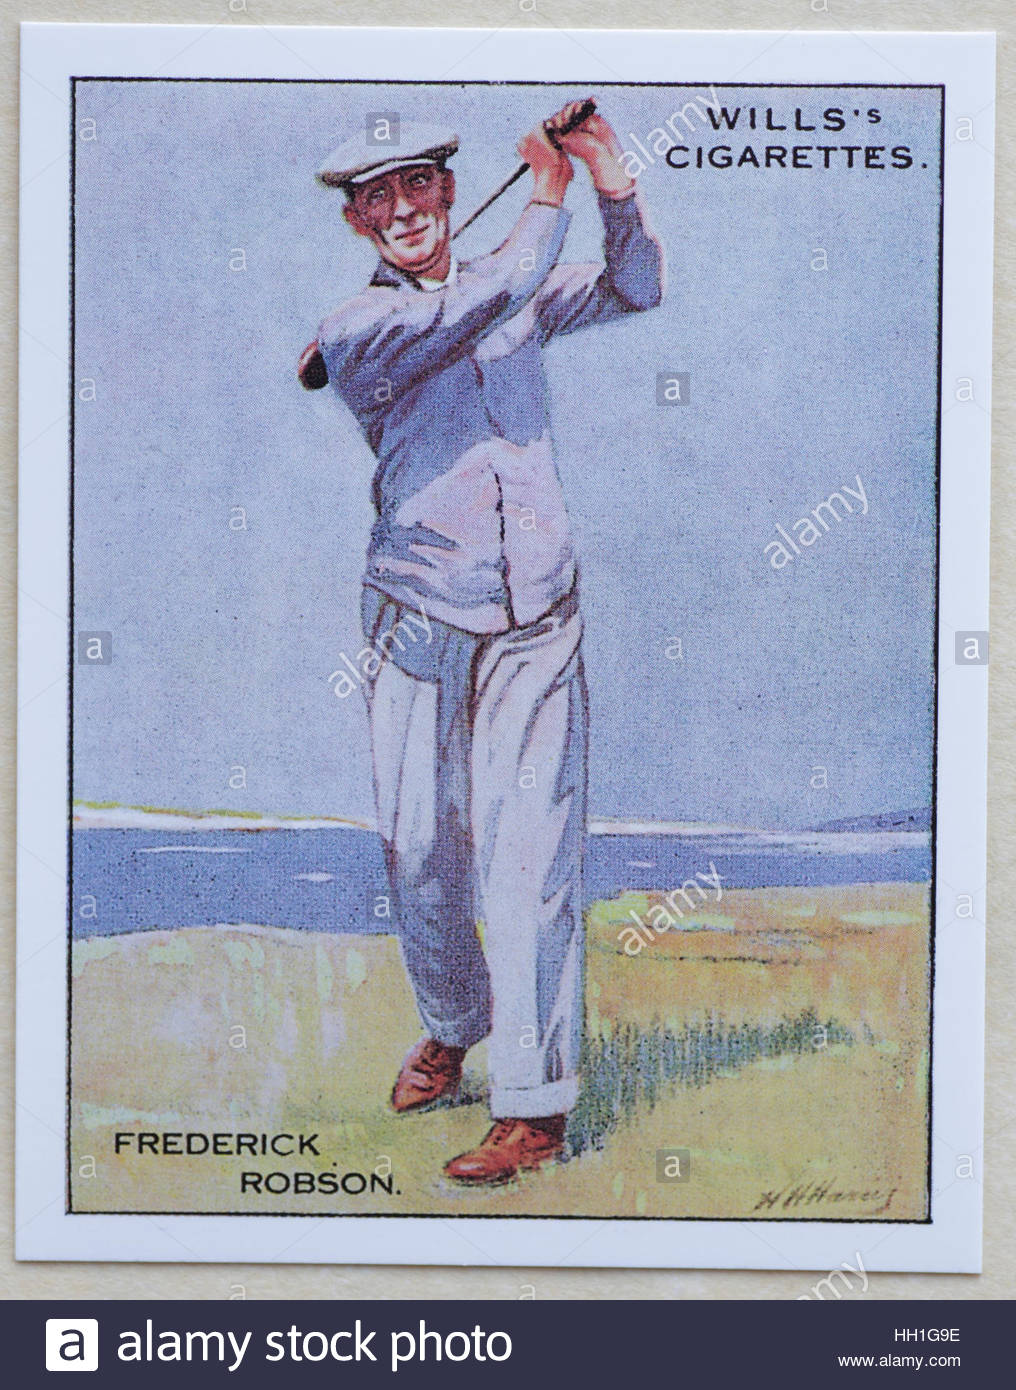 Frederick Robson - Famous Golfers, cigarette cards issued in 1930 by W.D.& H.O. Wills cigarettes. Stock Photo